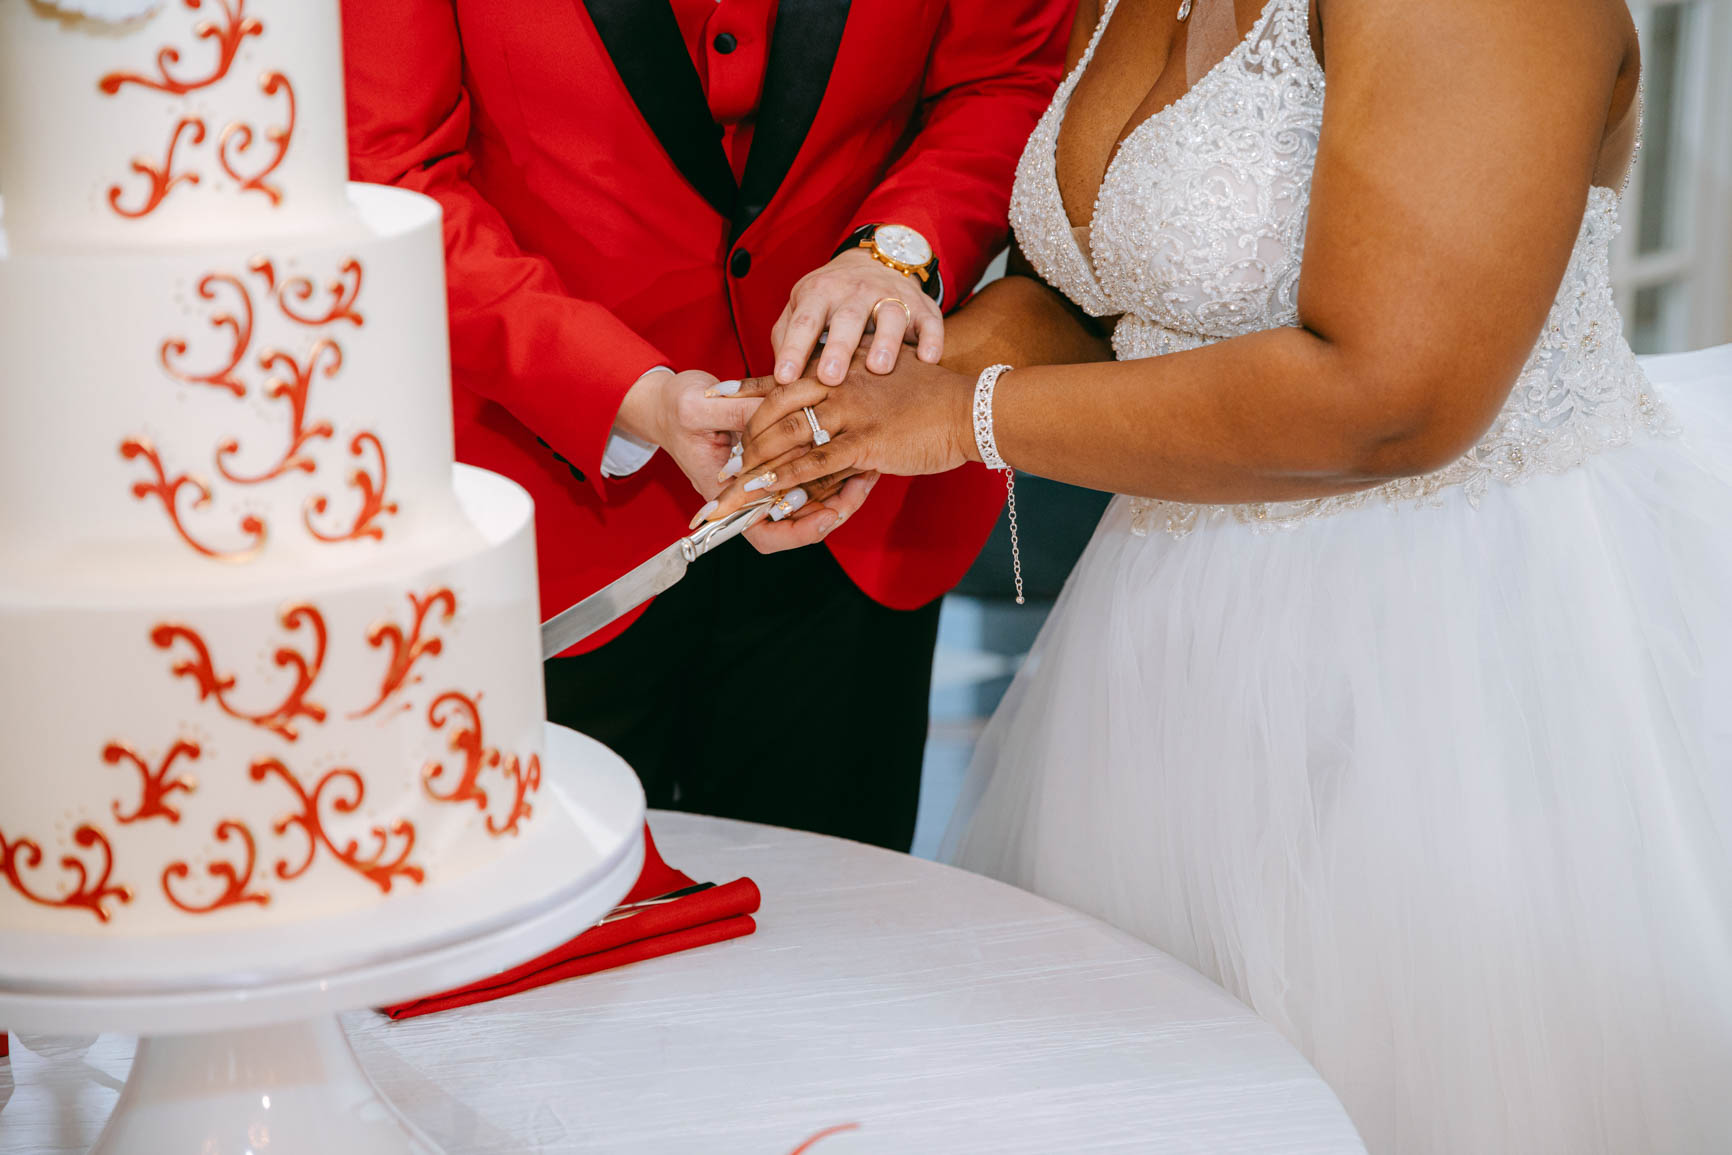 couple's cake cutting at Separk Mansion in Gastonia NC shot by Nhieu Tang Photography | nhieutang.com